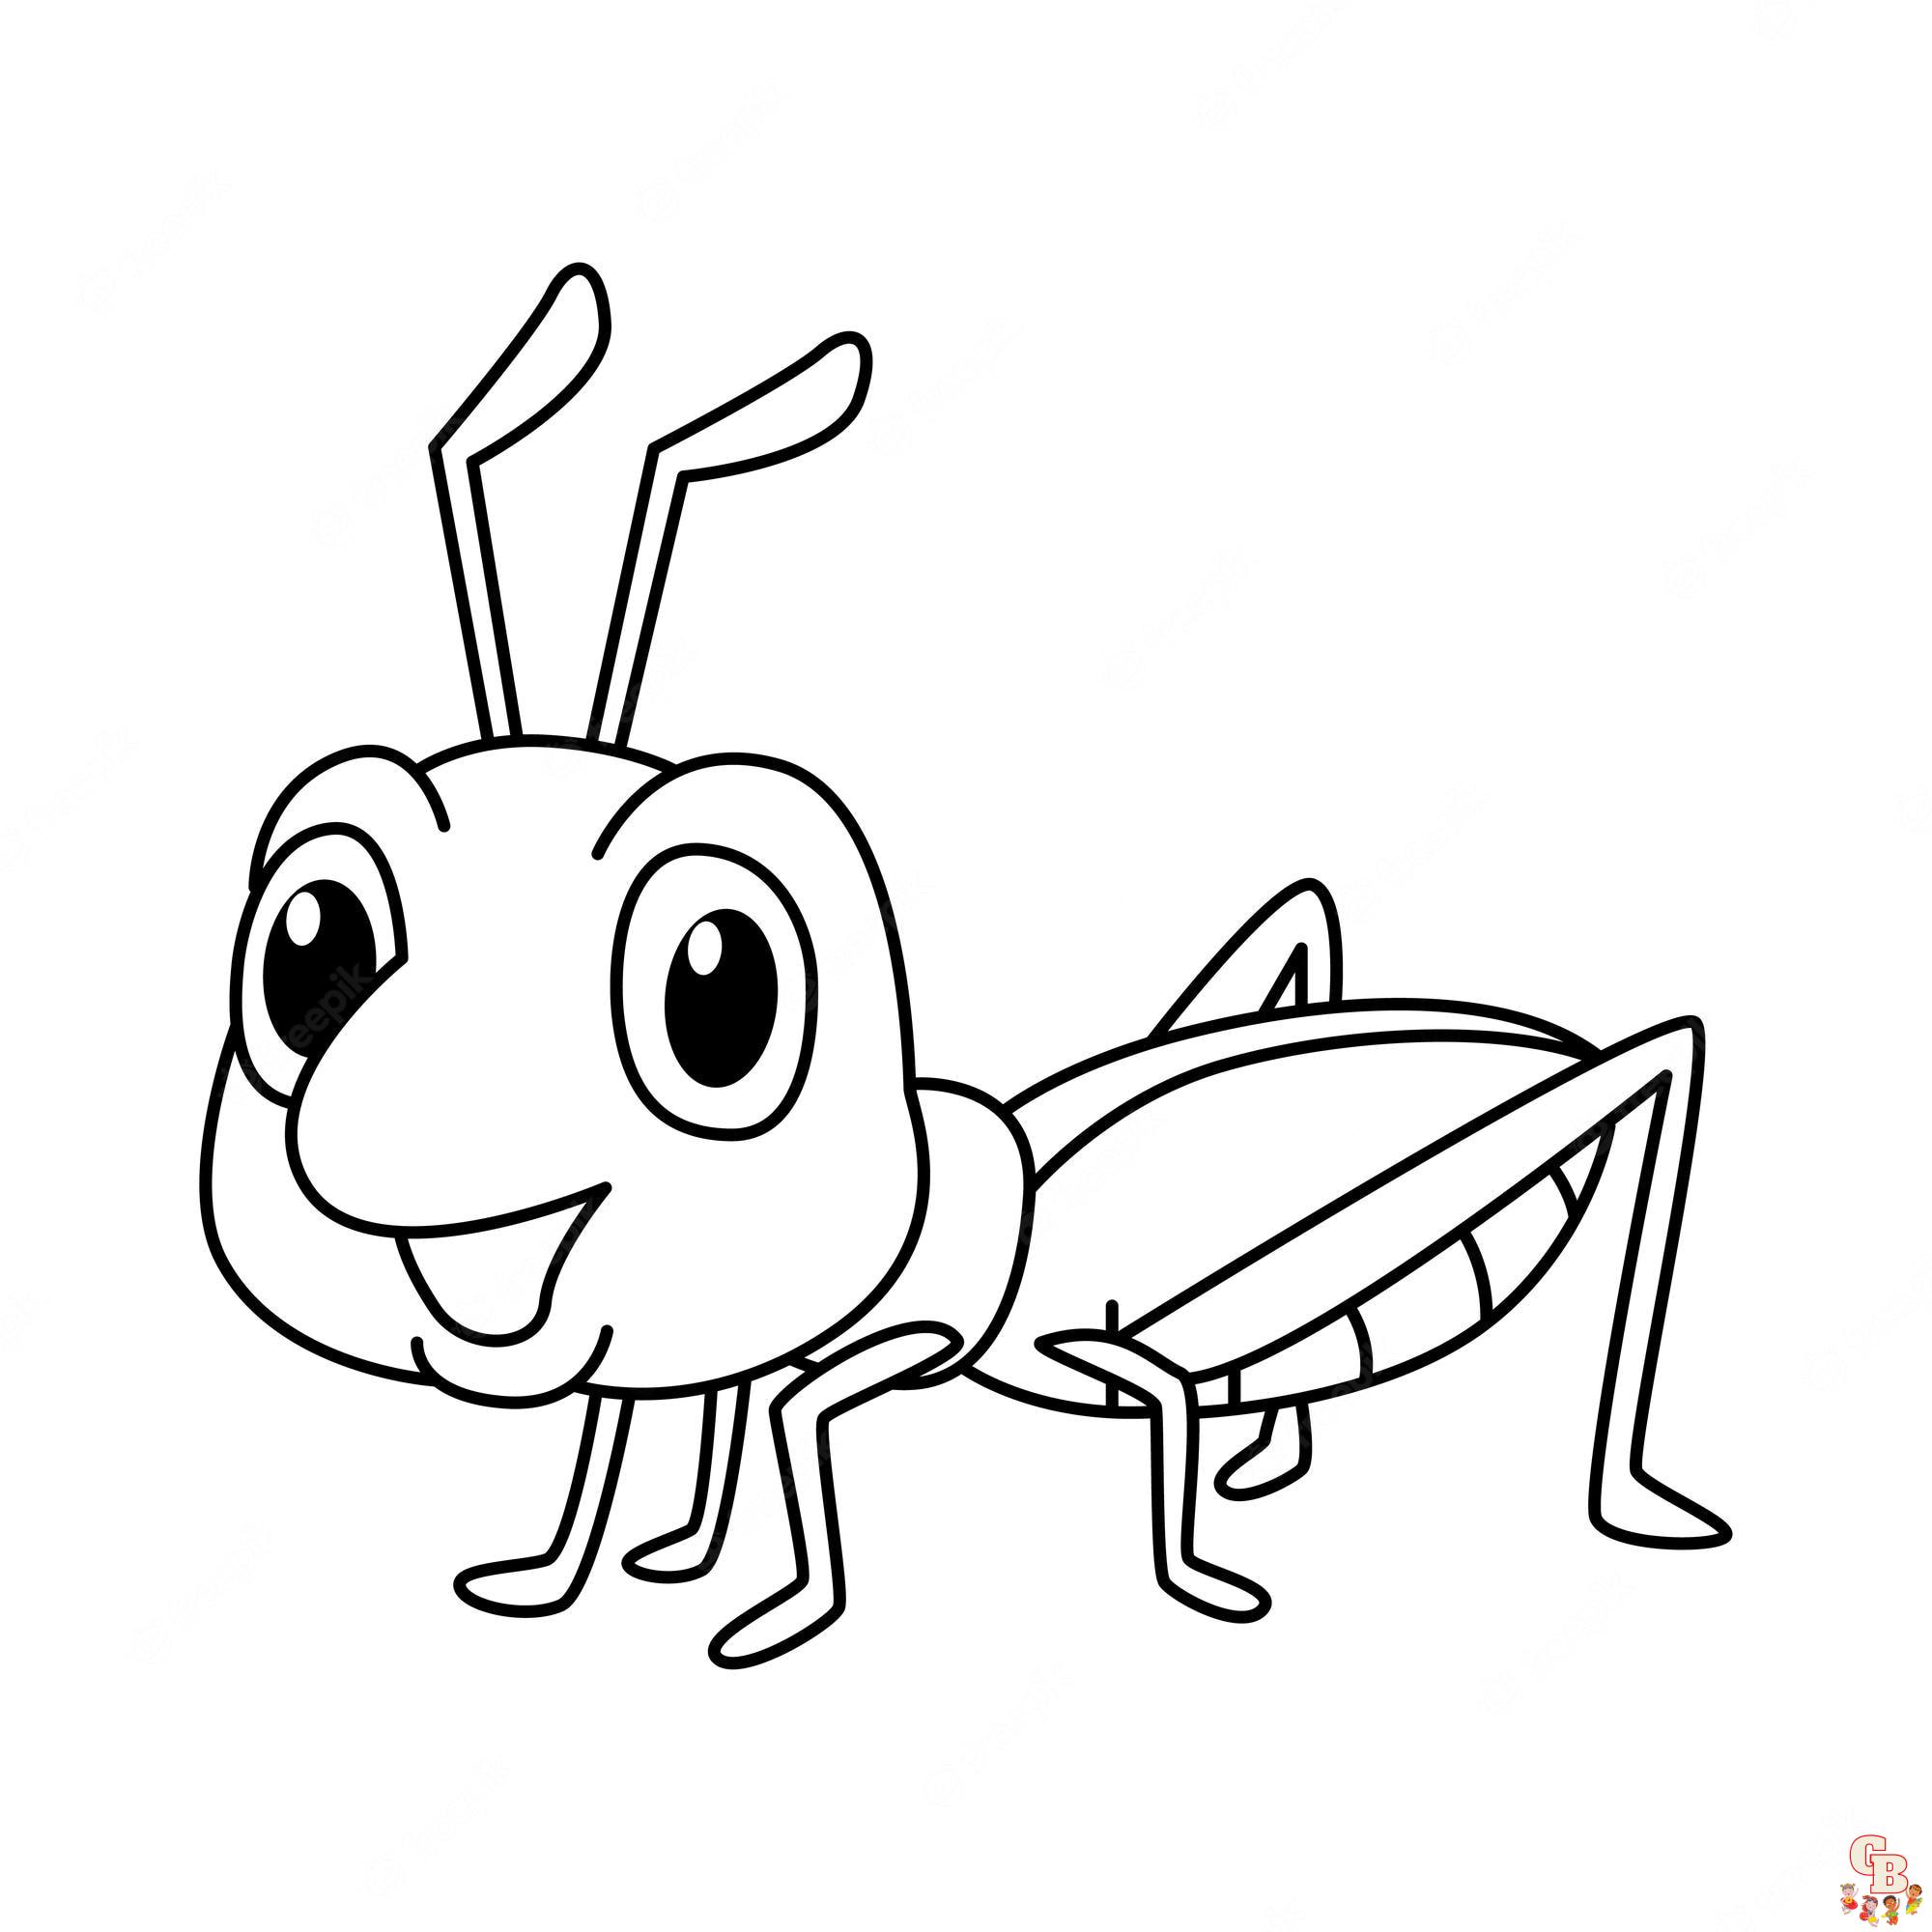 Grasshopper Coloring Pages 5